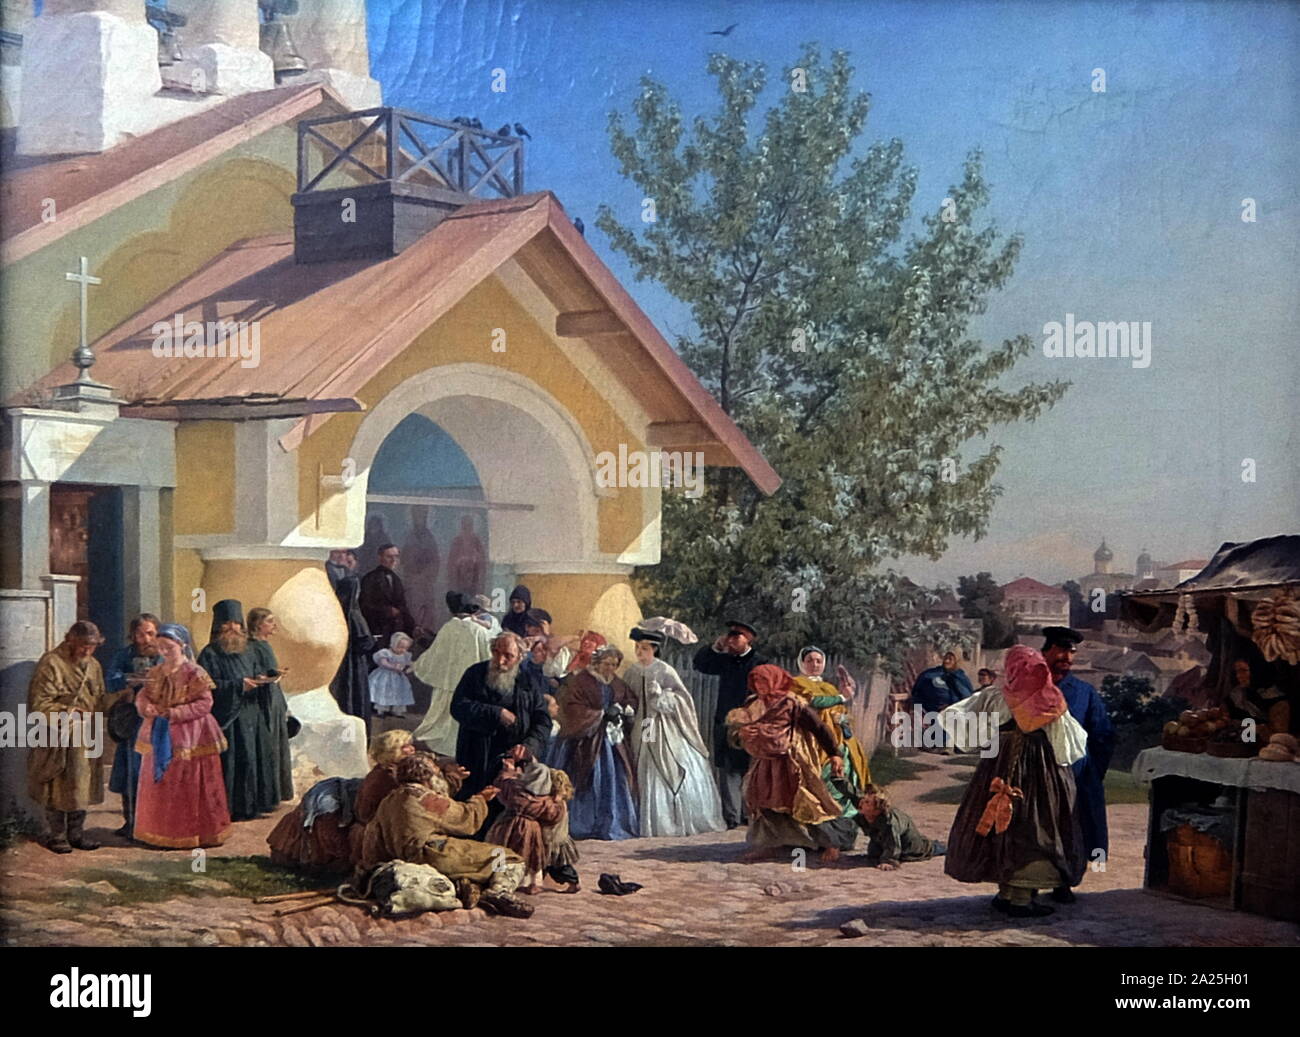 Painting titled 'Coming out of the Church in Pskov' by Alexander Ivanovich Morozov. Alexander Ivanovich Morozov (1835-1904) a Russian genre painter and engraver Stock Photo